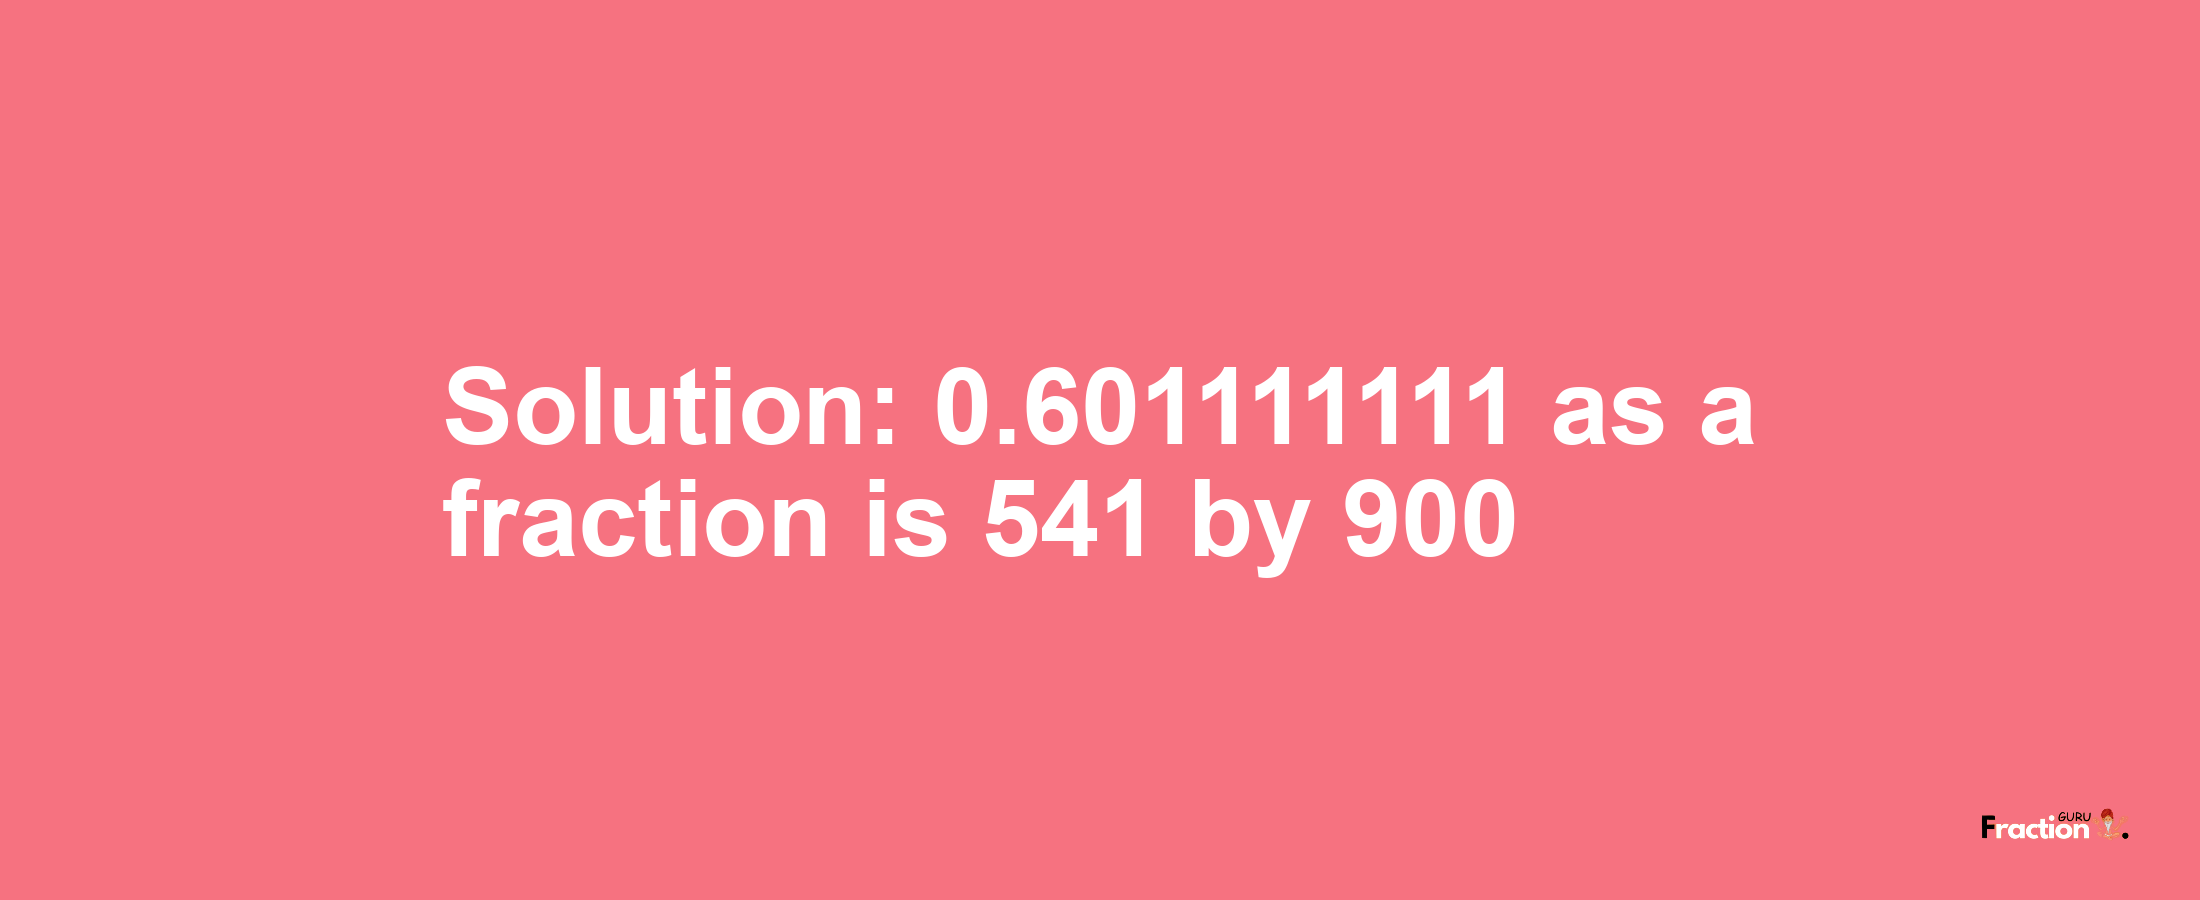 Solution:0.601111111 as a fraction is 541/900